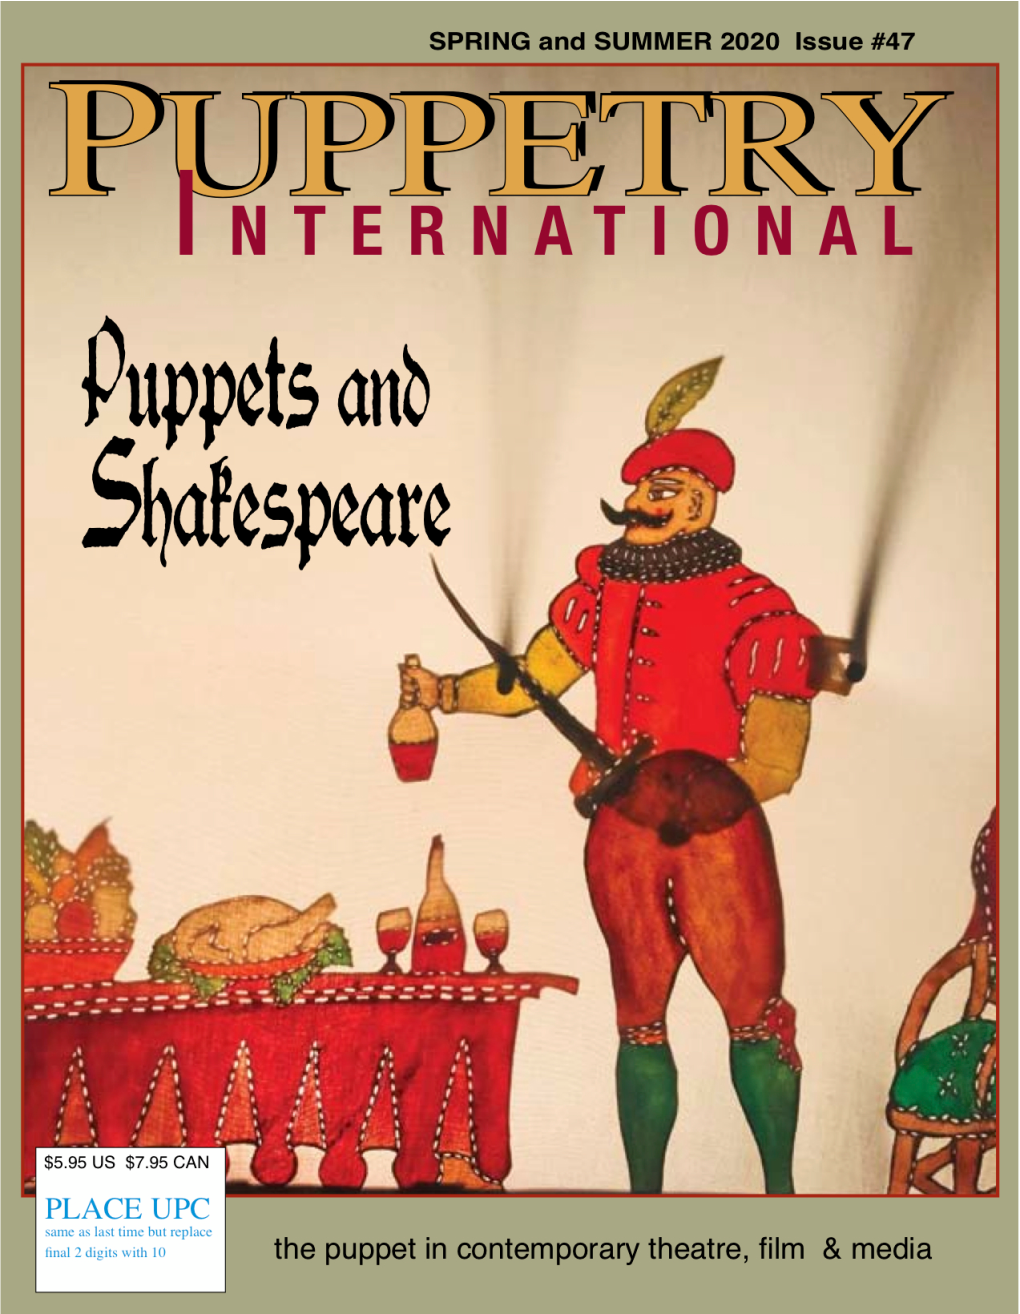 Puppets, Gods, and Brands